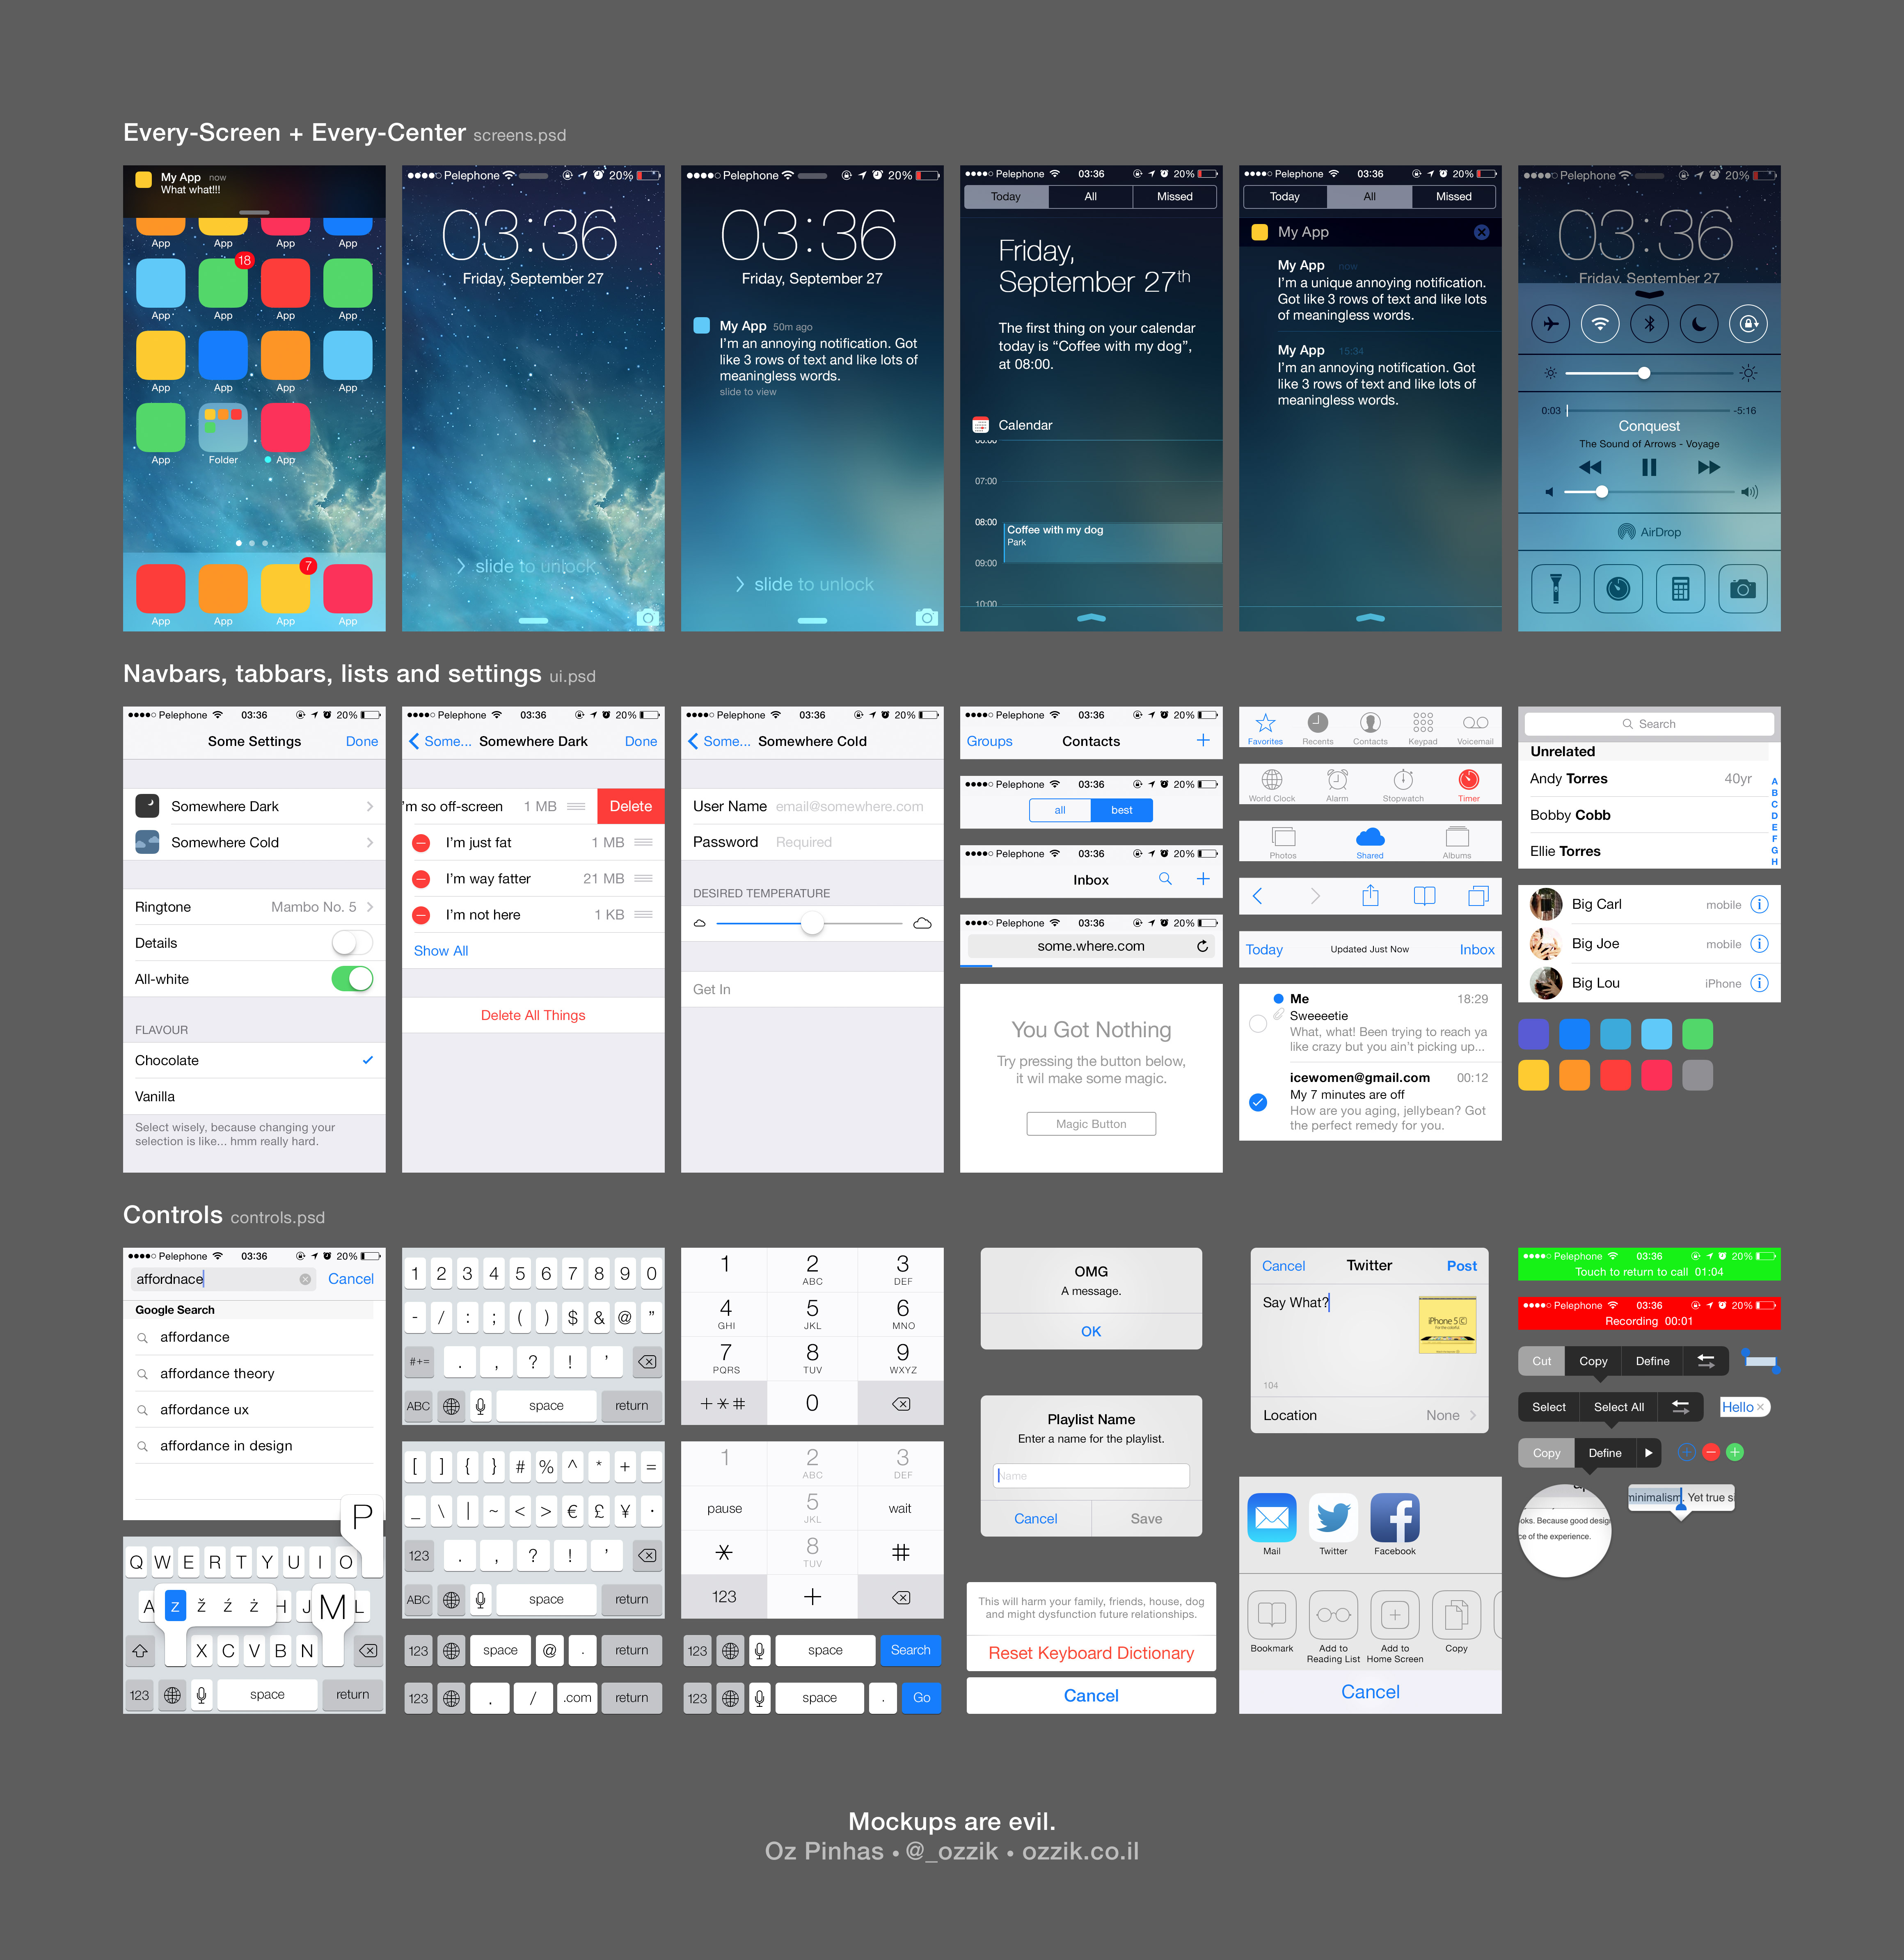 Large - PSD of iOS 7 UI elements